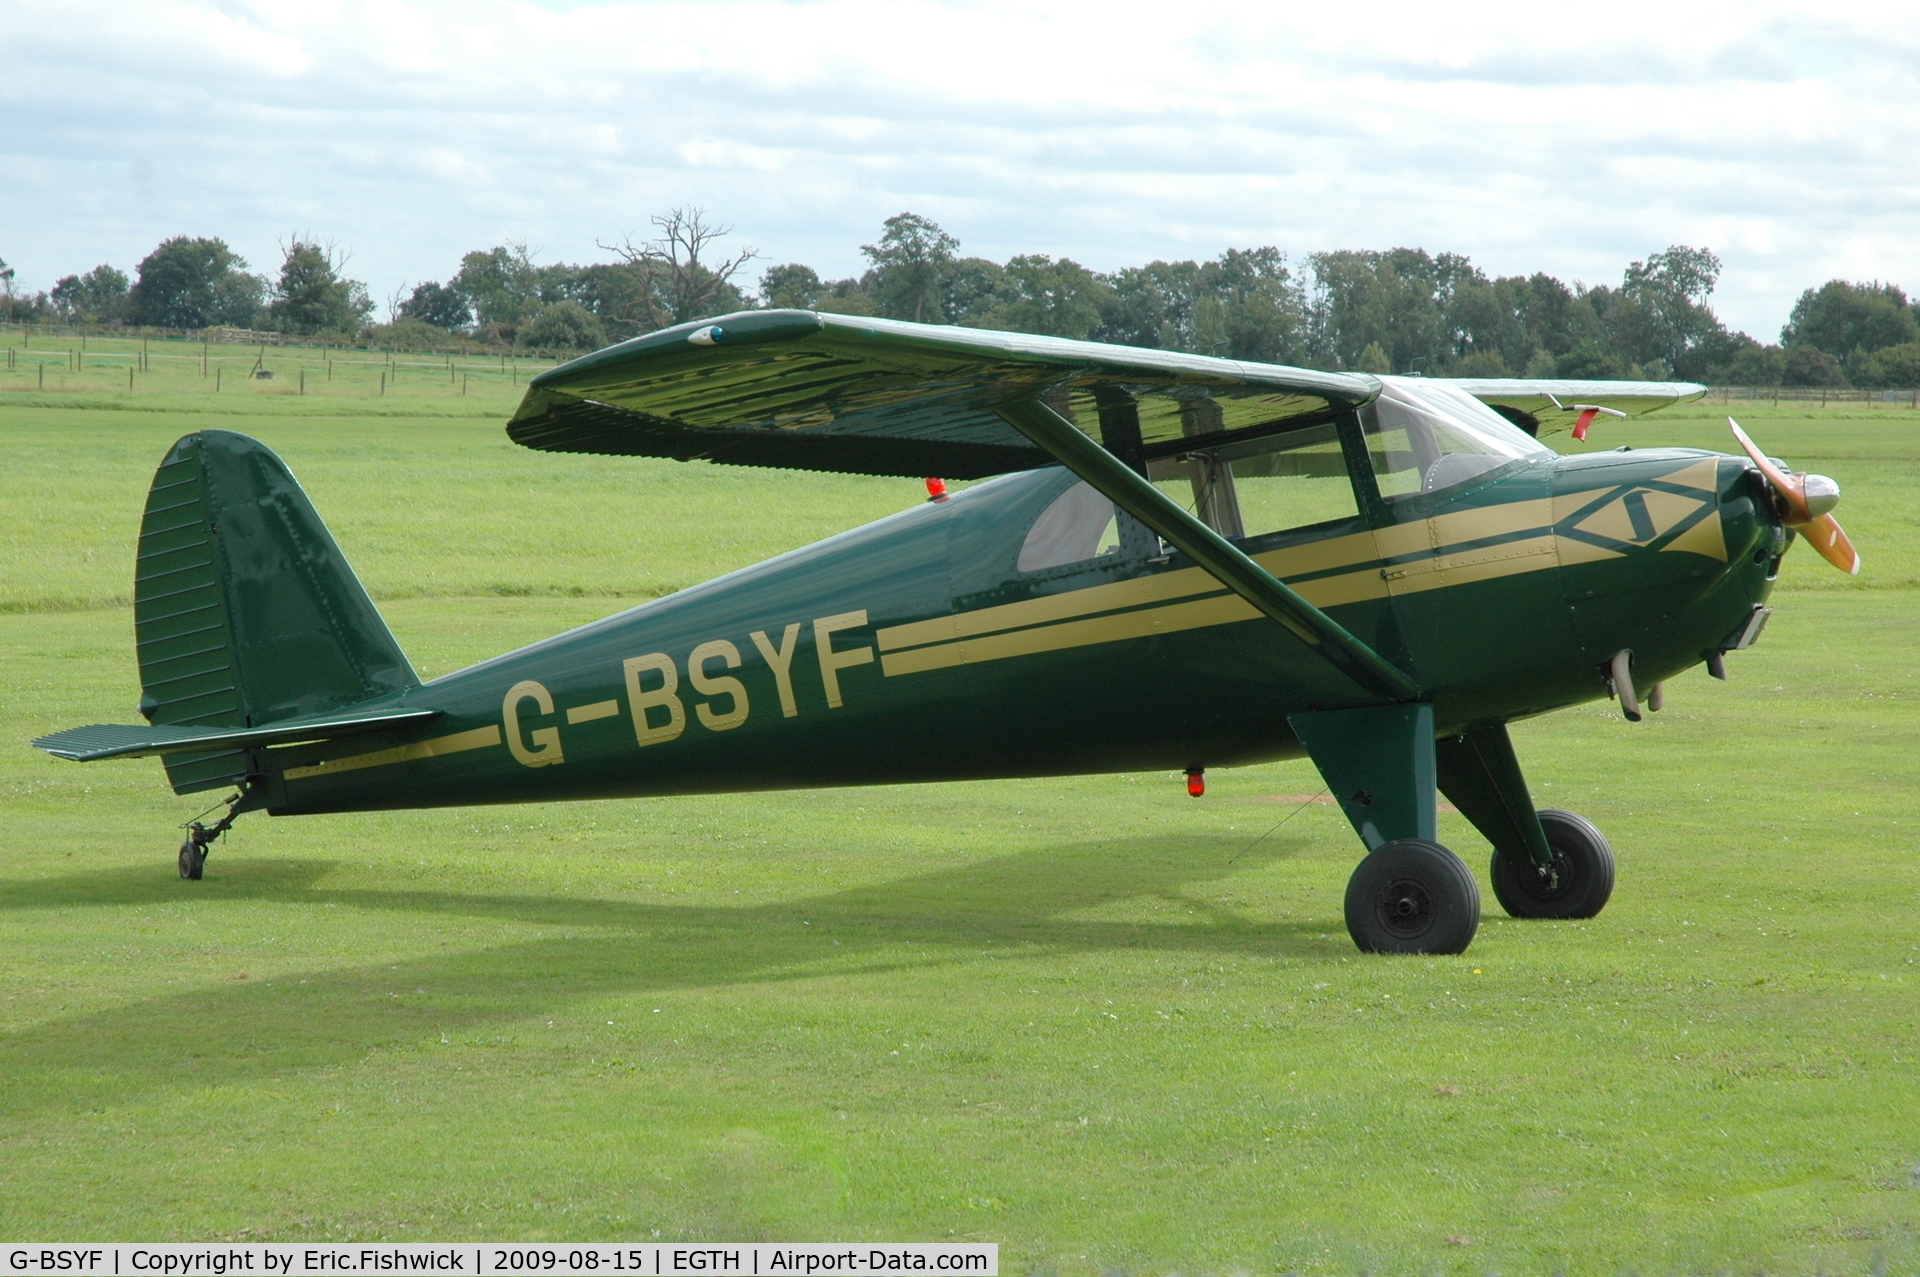 G-BSYF, 1946 Luscombe 8E Silvaire C/N 3455, 2. G-BSYF at Shuttleworth Collection Evening Air Display Aug 09